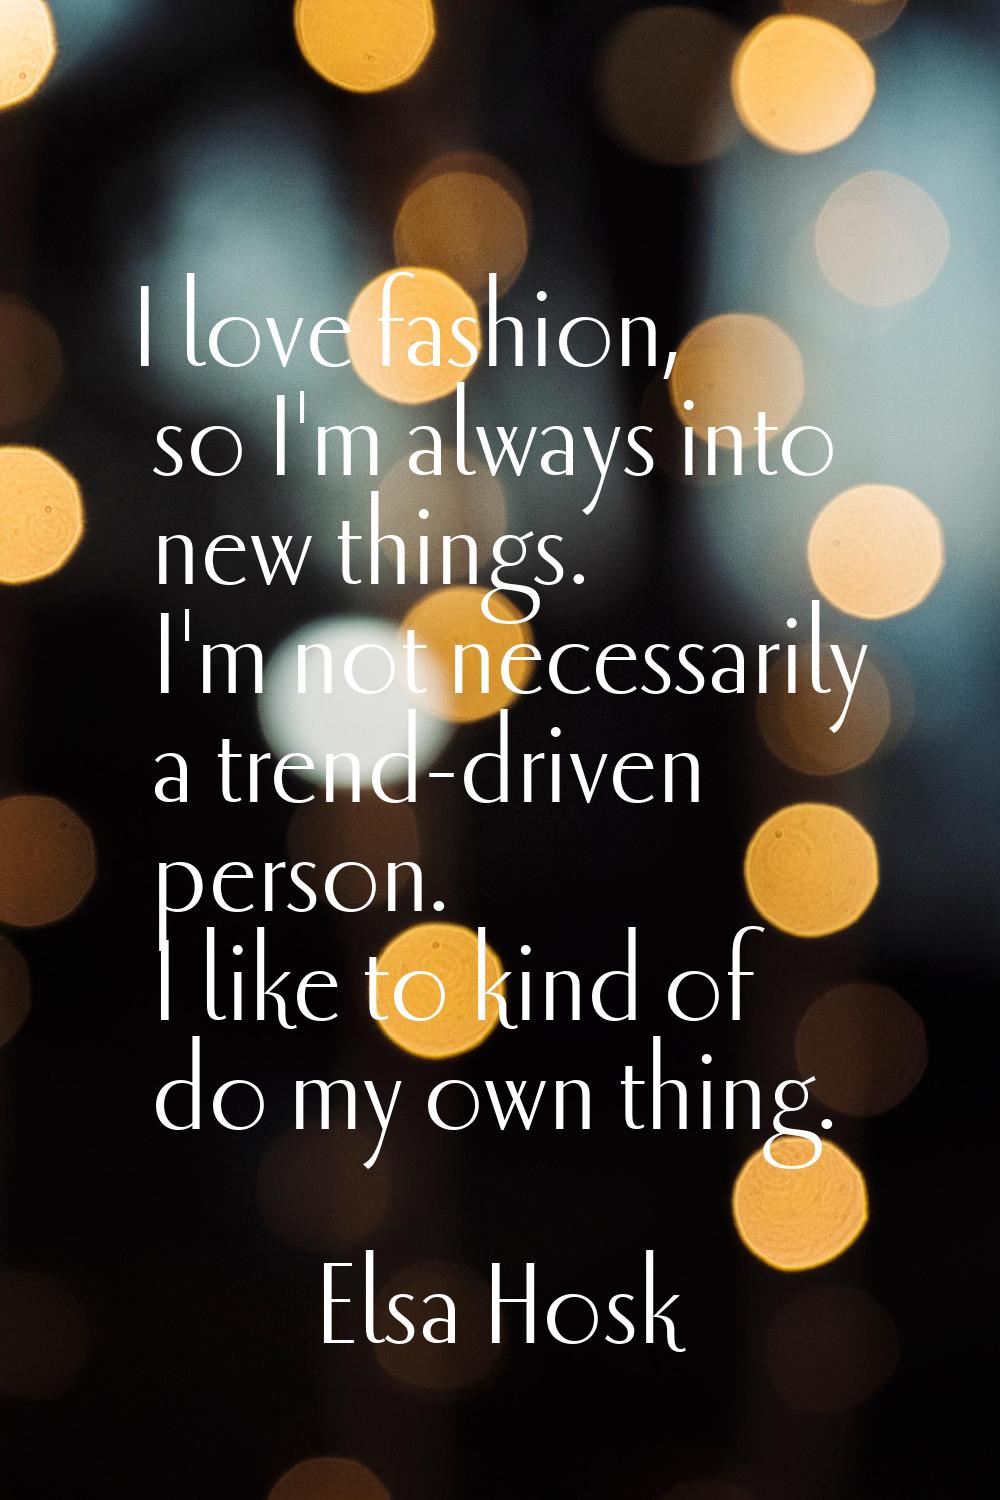 I love fashion, so I'm always into new things. I'm not necessarily a trend-driven person. I like to